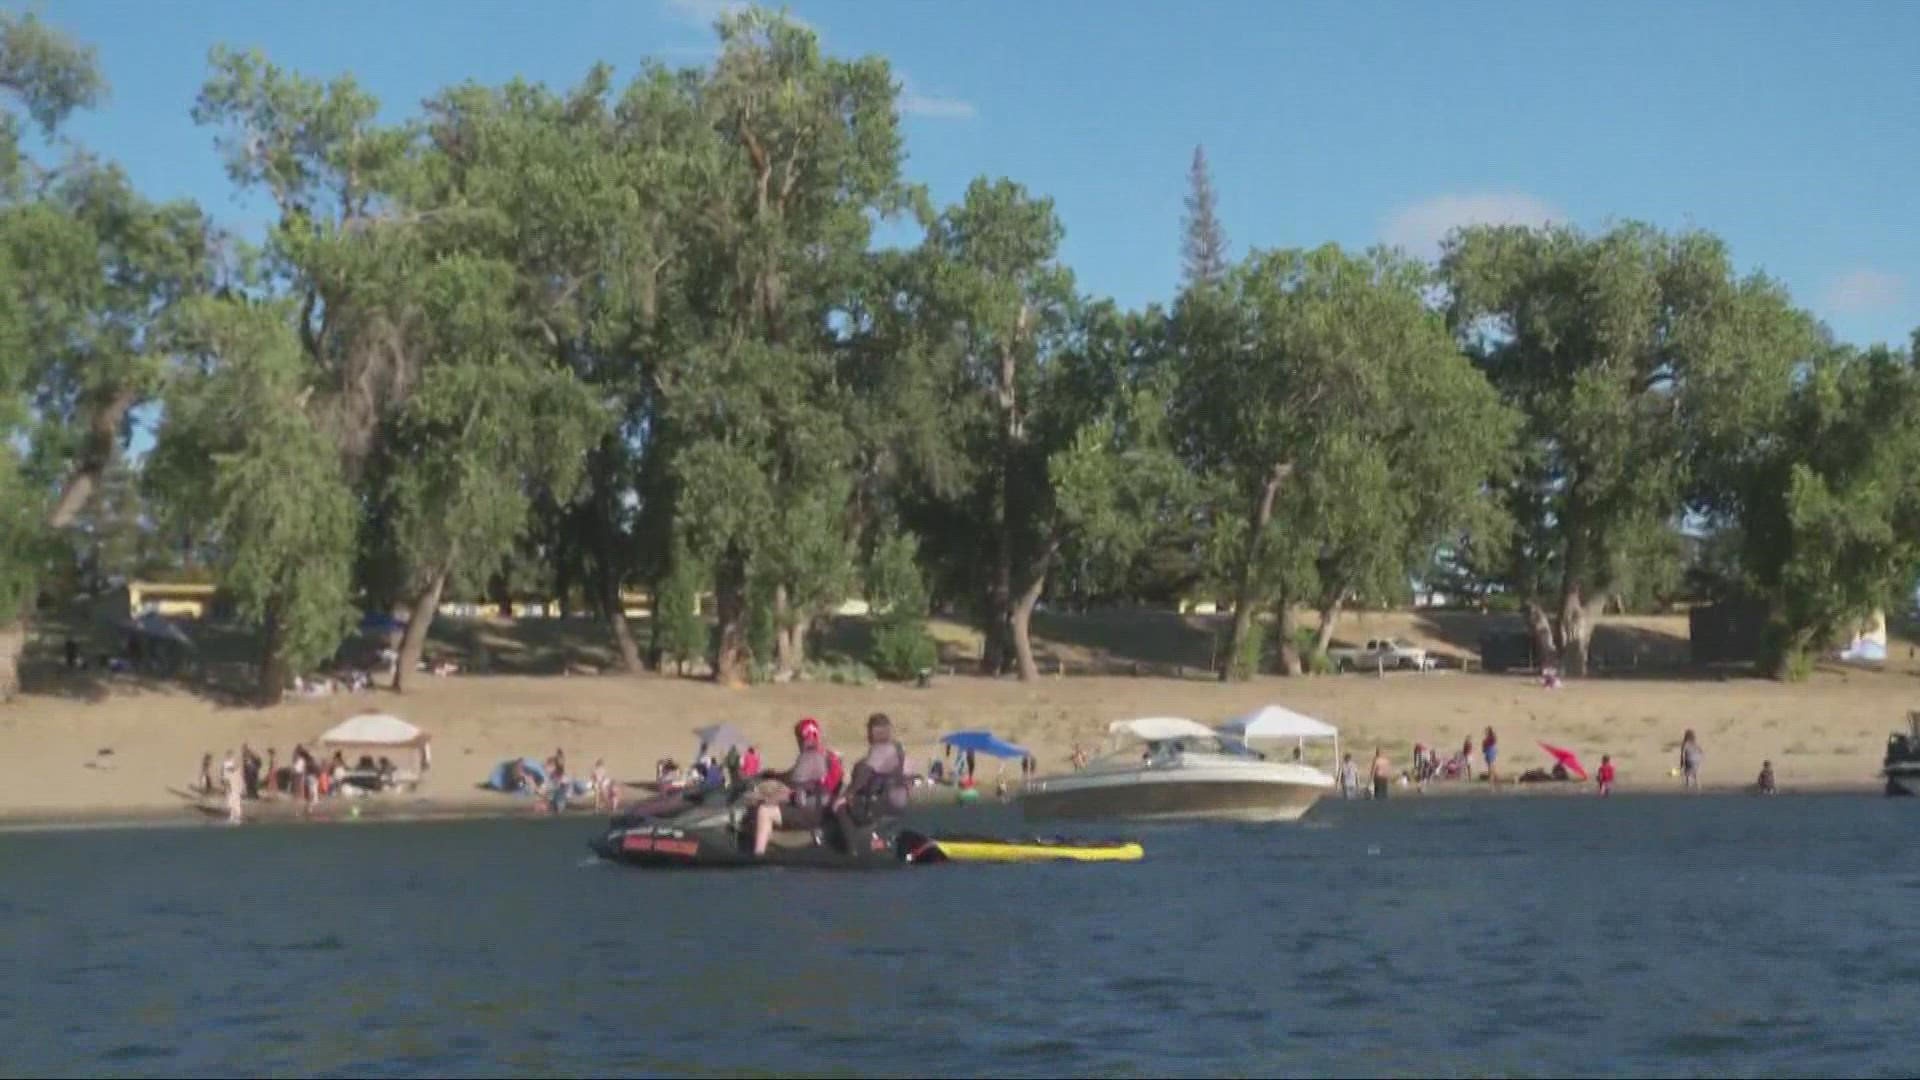 Officials reported multiple incidences of people drowning in the American River over Fourth of July weekend.